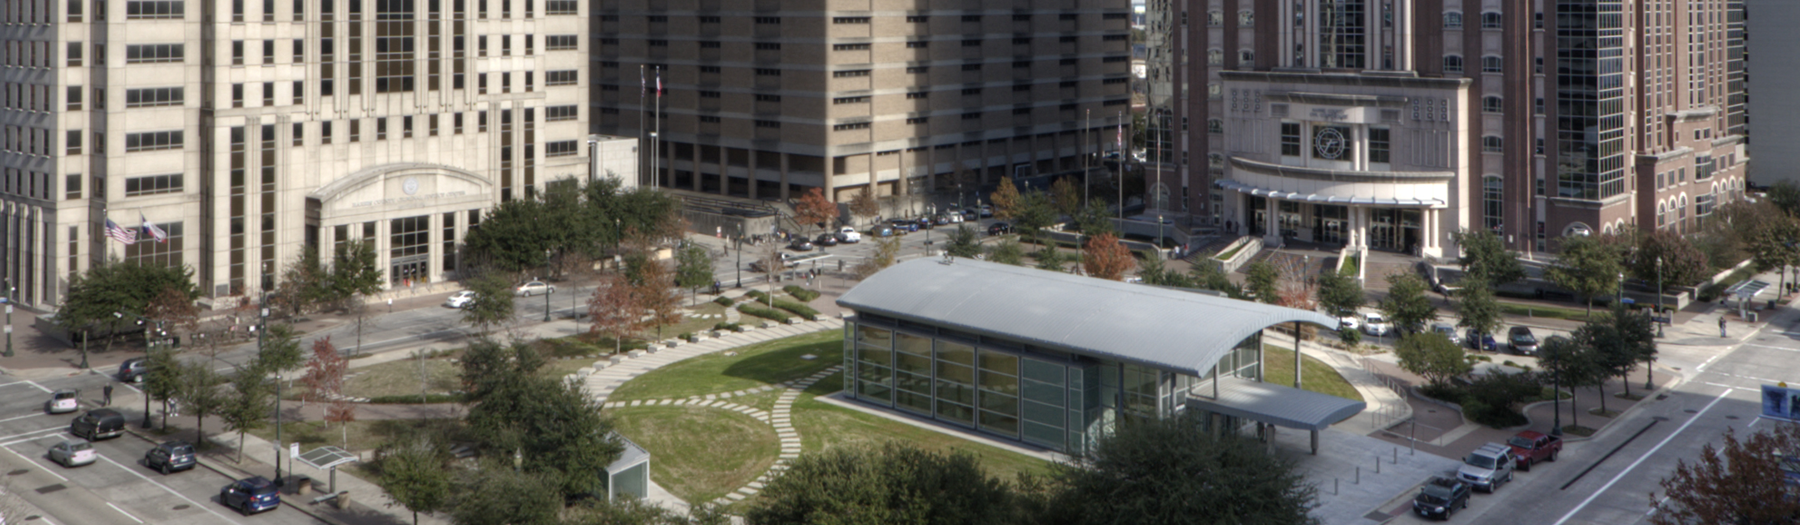 image showing a birds eye view of the harris county courthouse complex